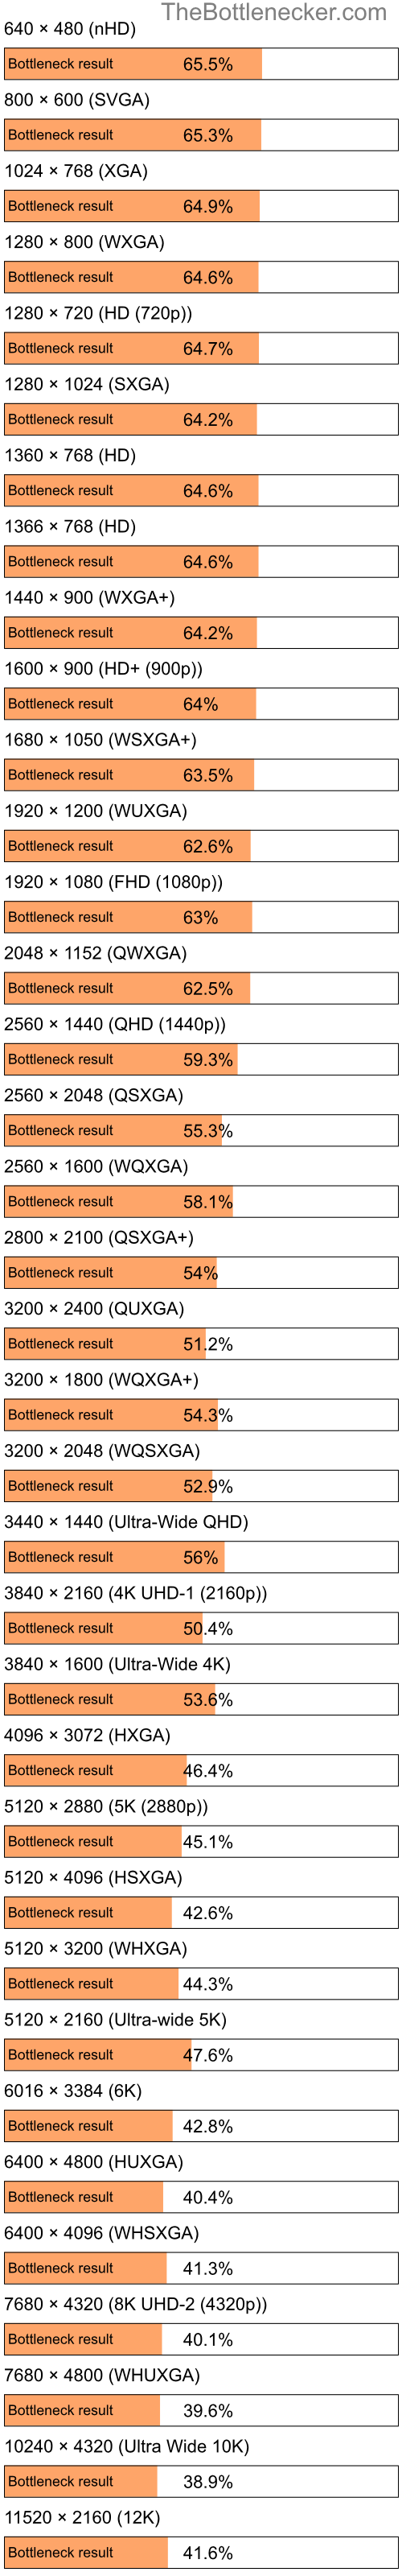 Bottleneck results by resolution for Intel Core i5-3470 and NVIDIA GeForce RTX 2070 SUPER in Processor Intense Tasks